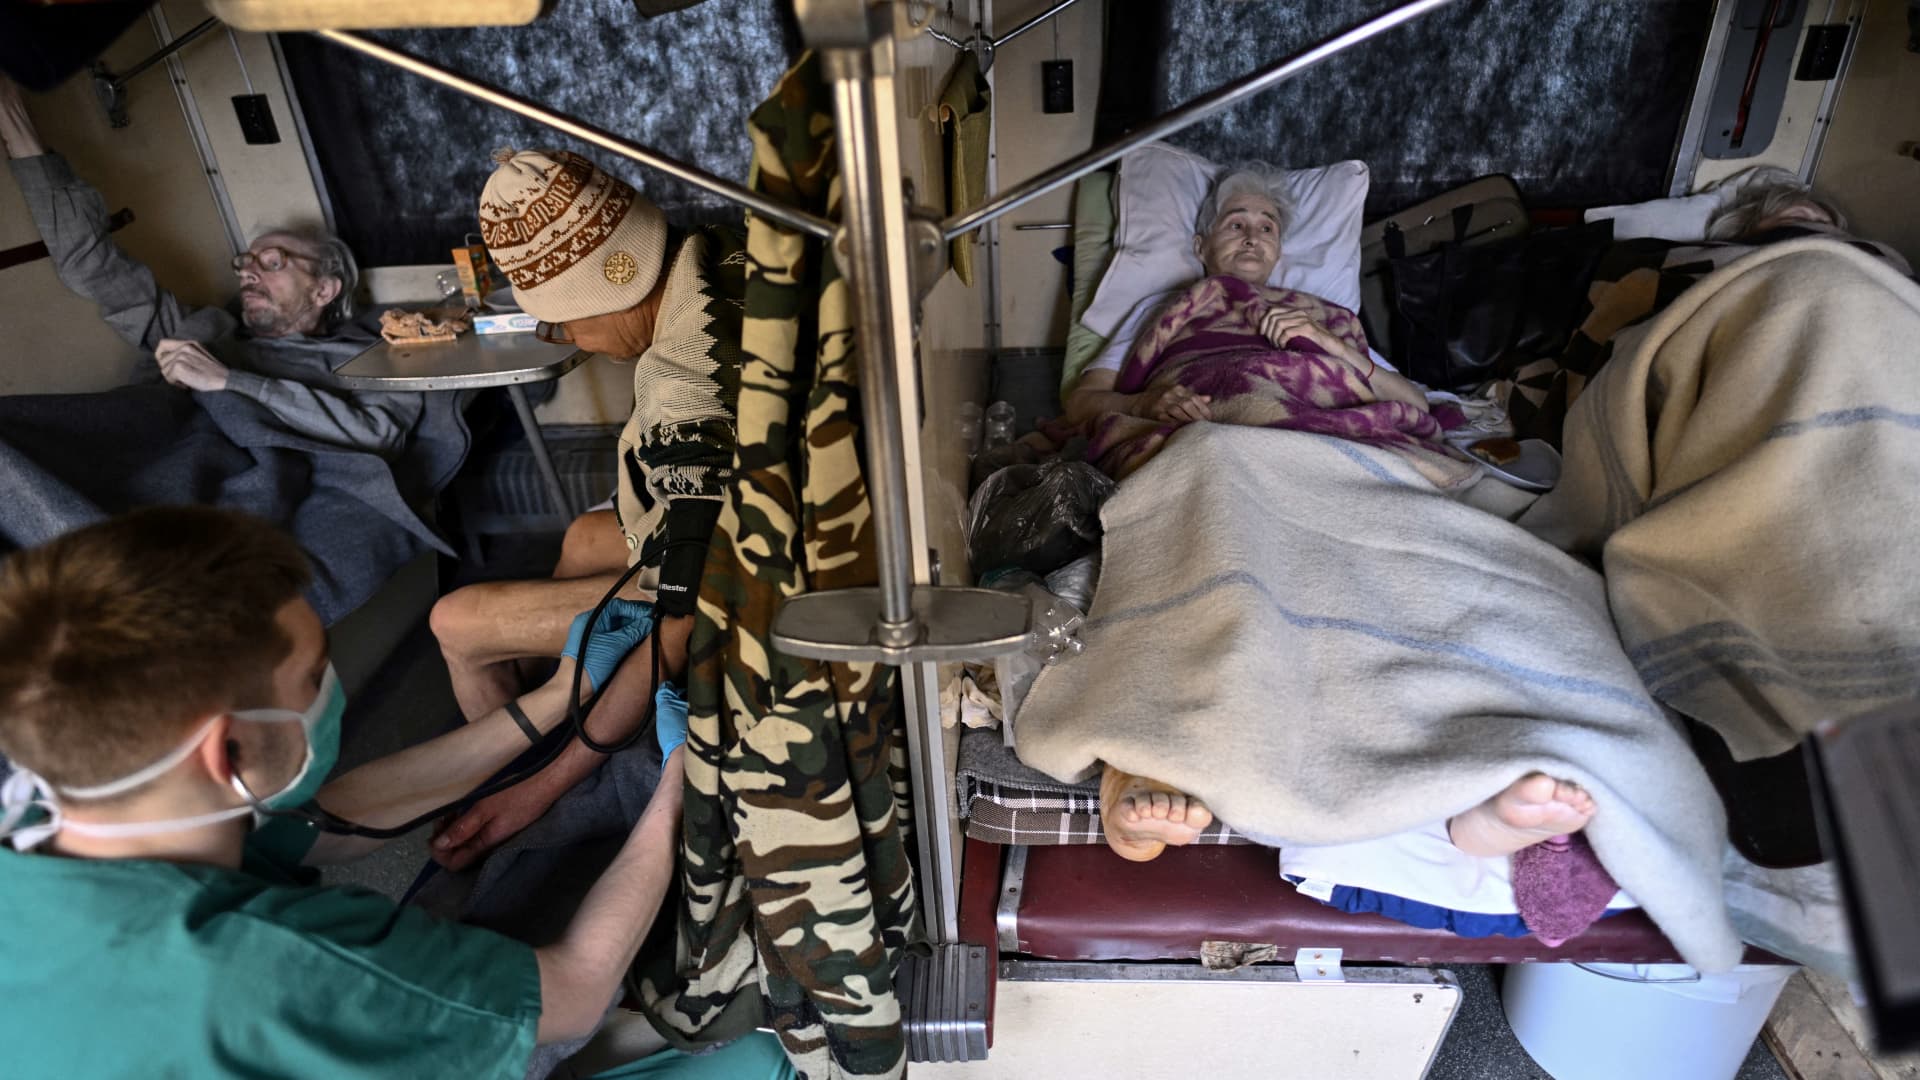 Doctors Without Borders (MSF), in cooperation with the Ukrainian railways and the Ministry of Health, has just completed a new medical train referral of 48 patients, coming from hospitals close to the frontline in the war-affected east of the country.